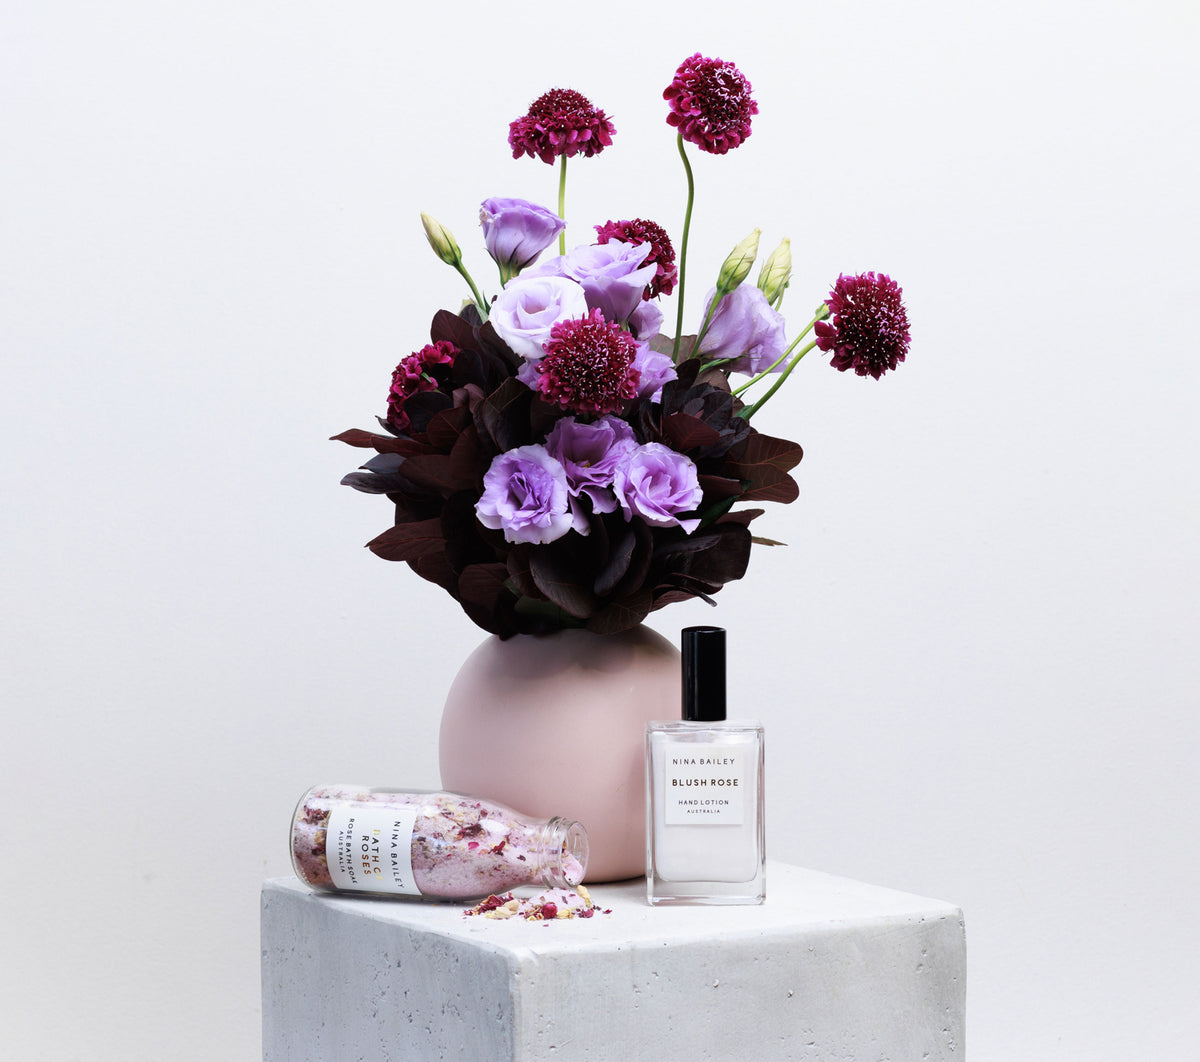 flowers delivered, Melbourne wide delivery, fresh flowers and gifts, care package, care pack, pamper.  